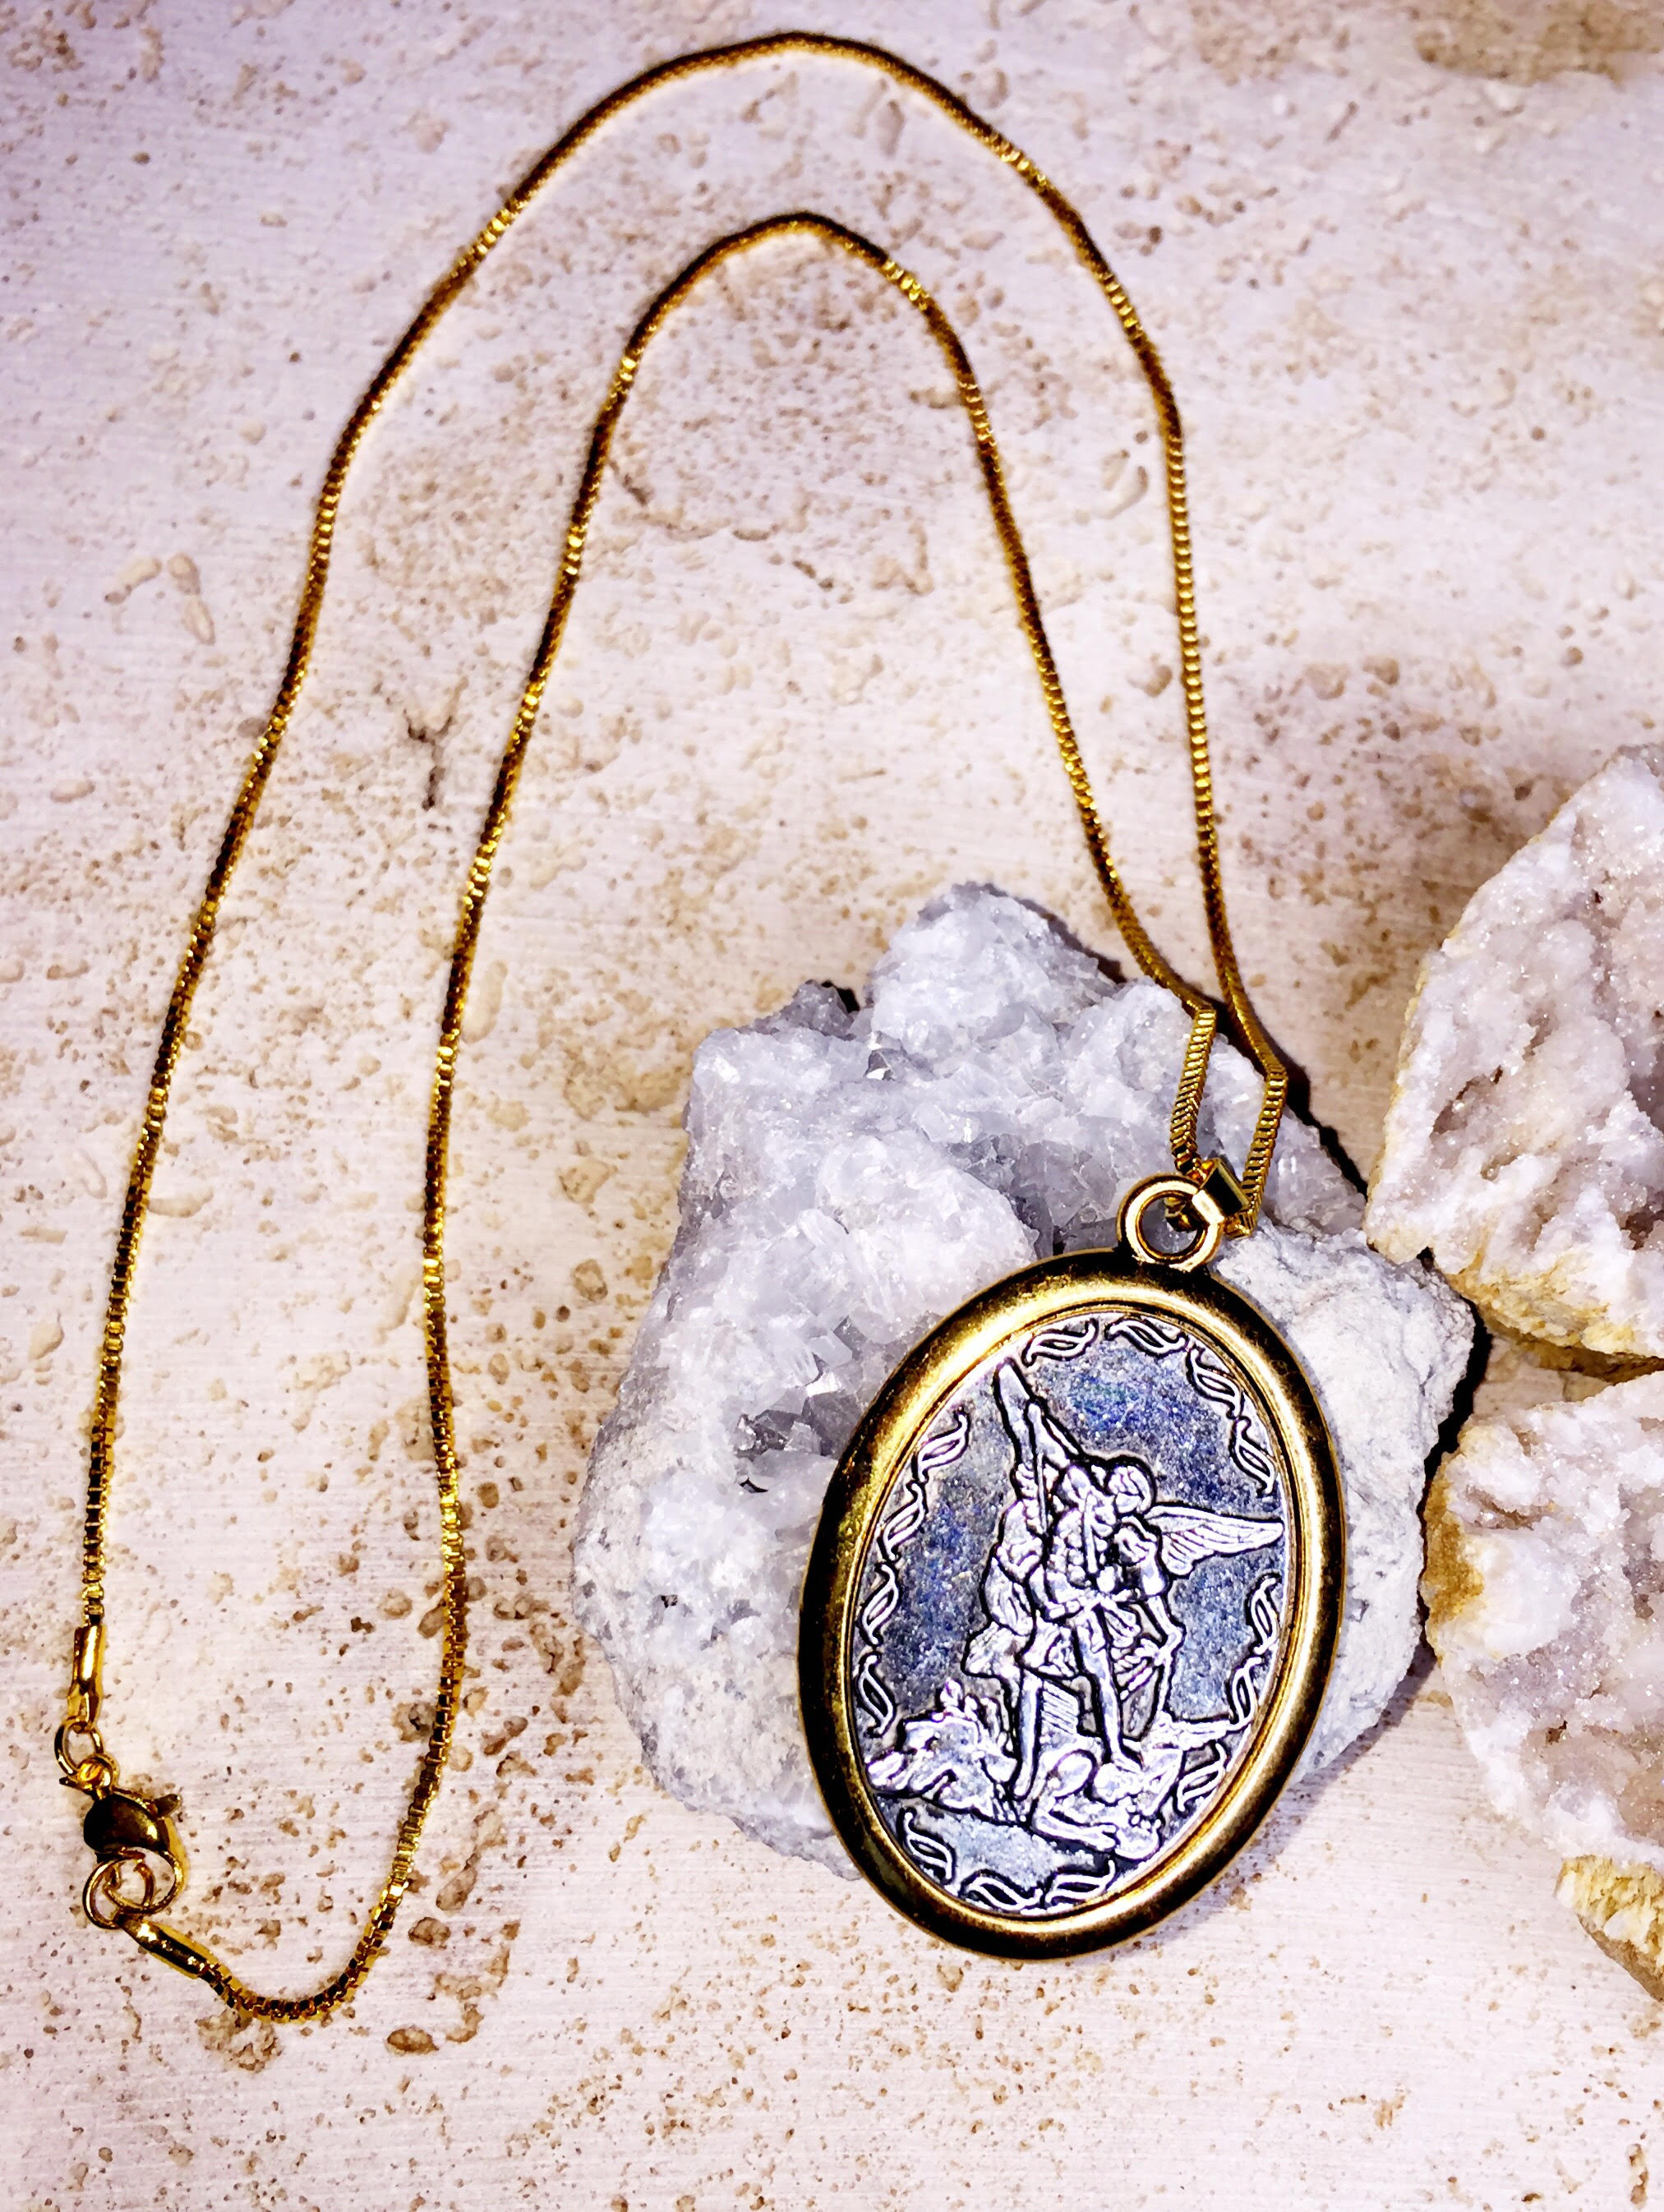 Archangel Michael Necklace Protection (Blessed)